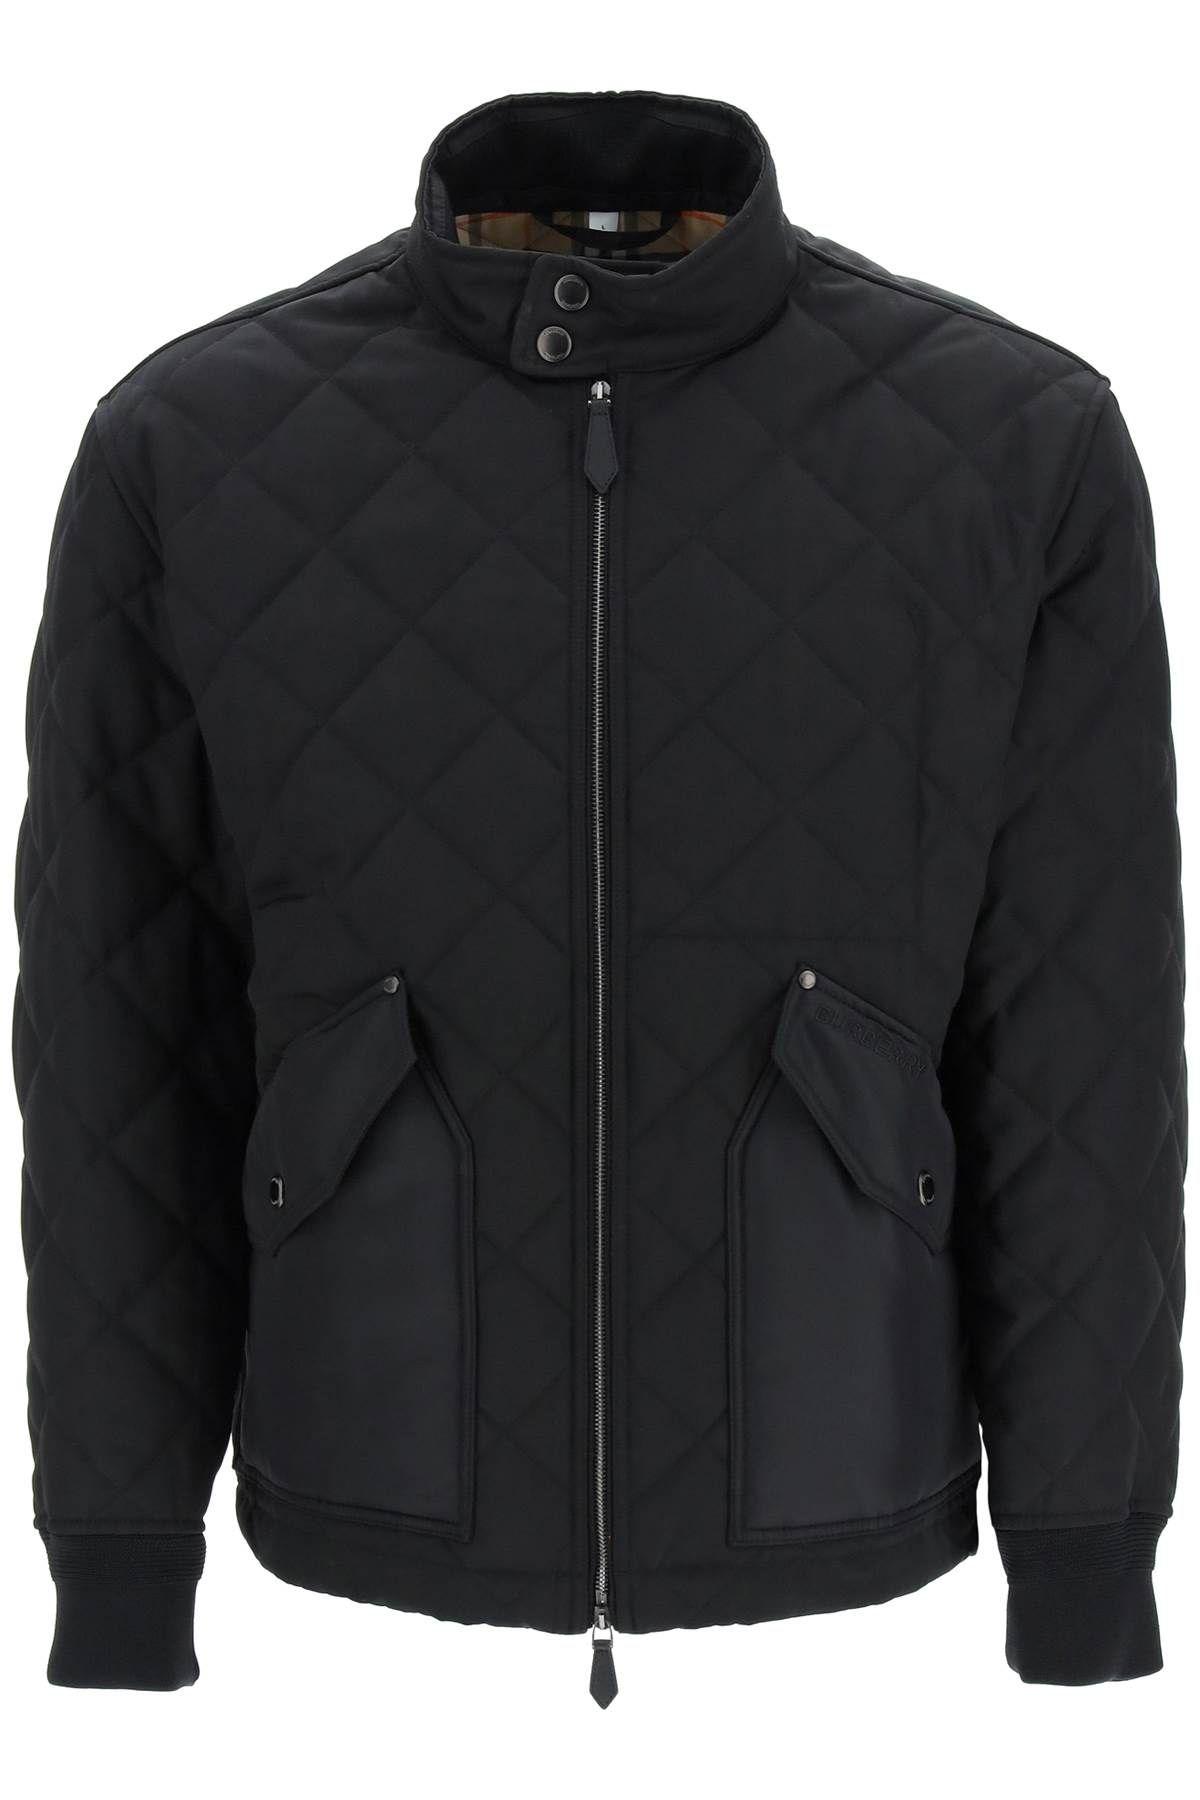 BURBERRY DIAMOND-QUILTED THERMOREGULATED JACKET